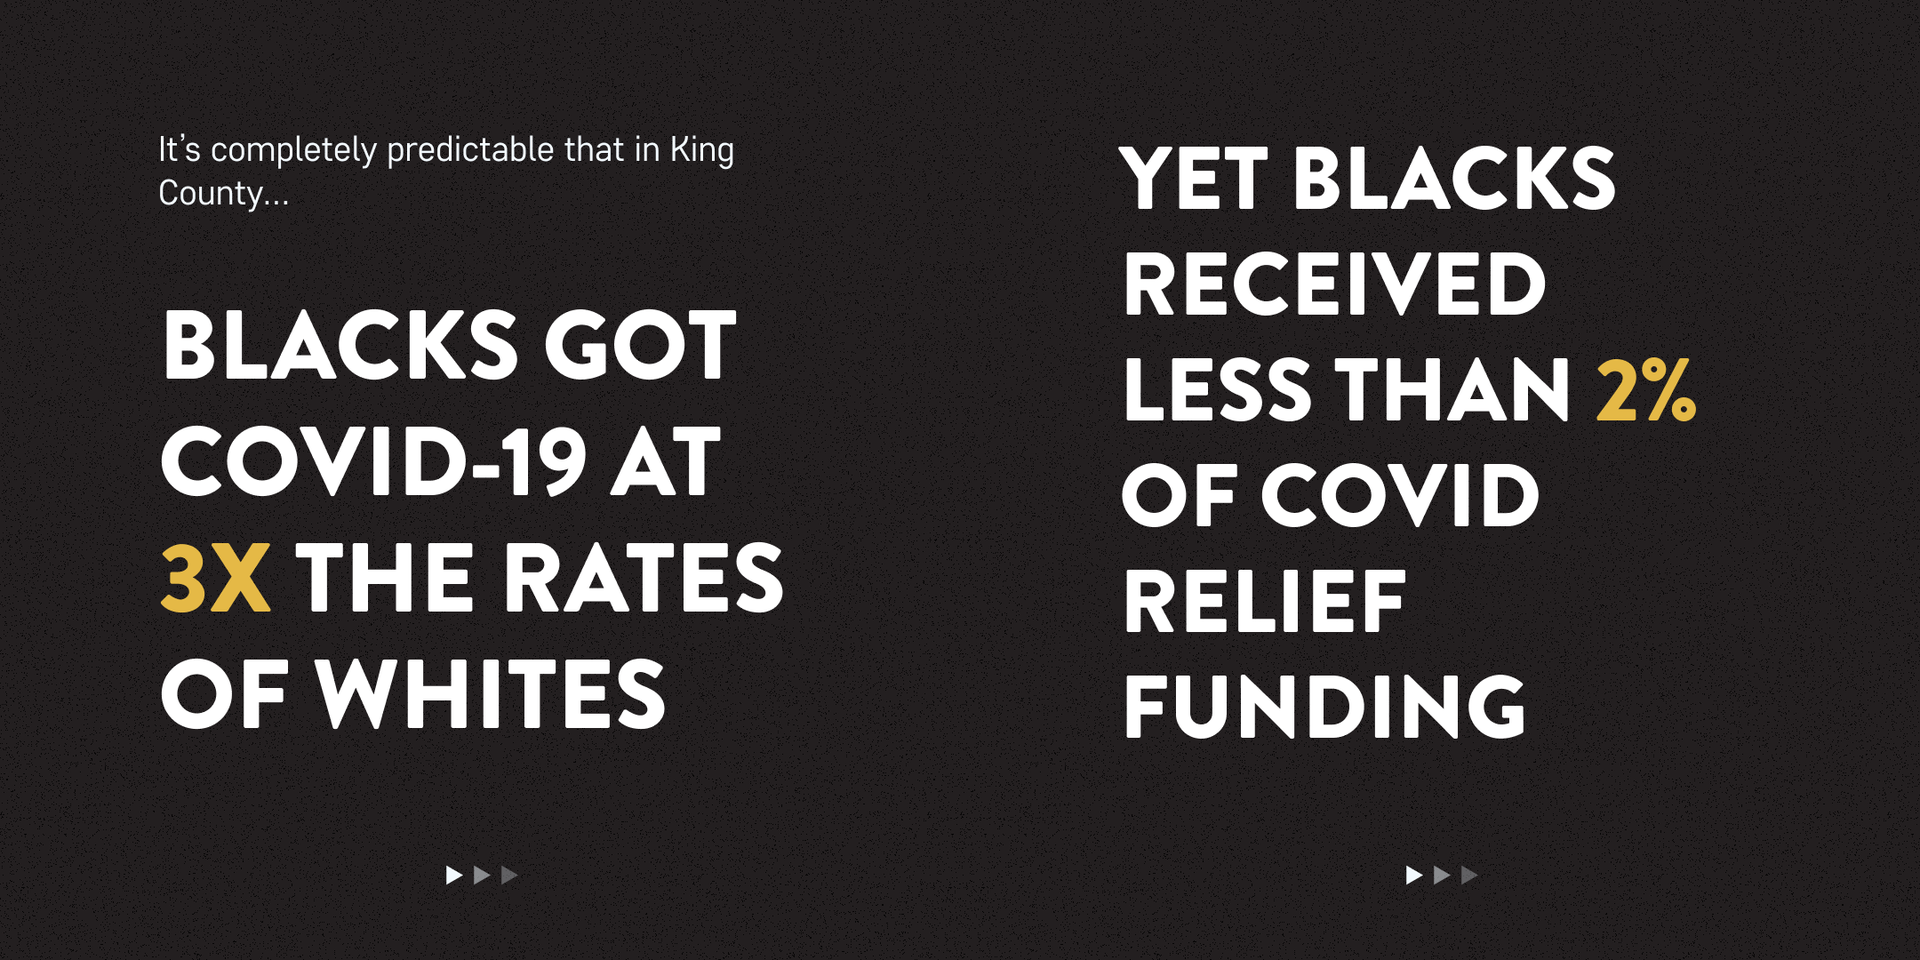 Graphic that says It's completely predictable that in King County... Blacks got COVID-19 at 3X the rates of whites and Yet Blacks received less than 2% of COVID relief funding.